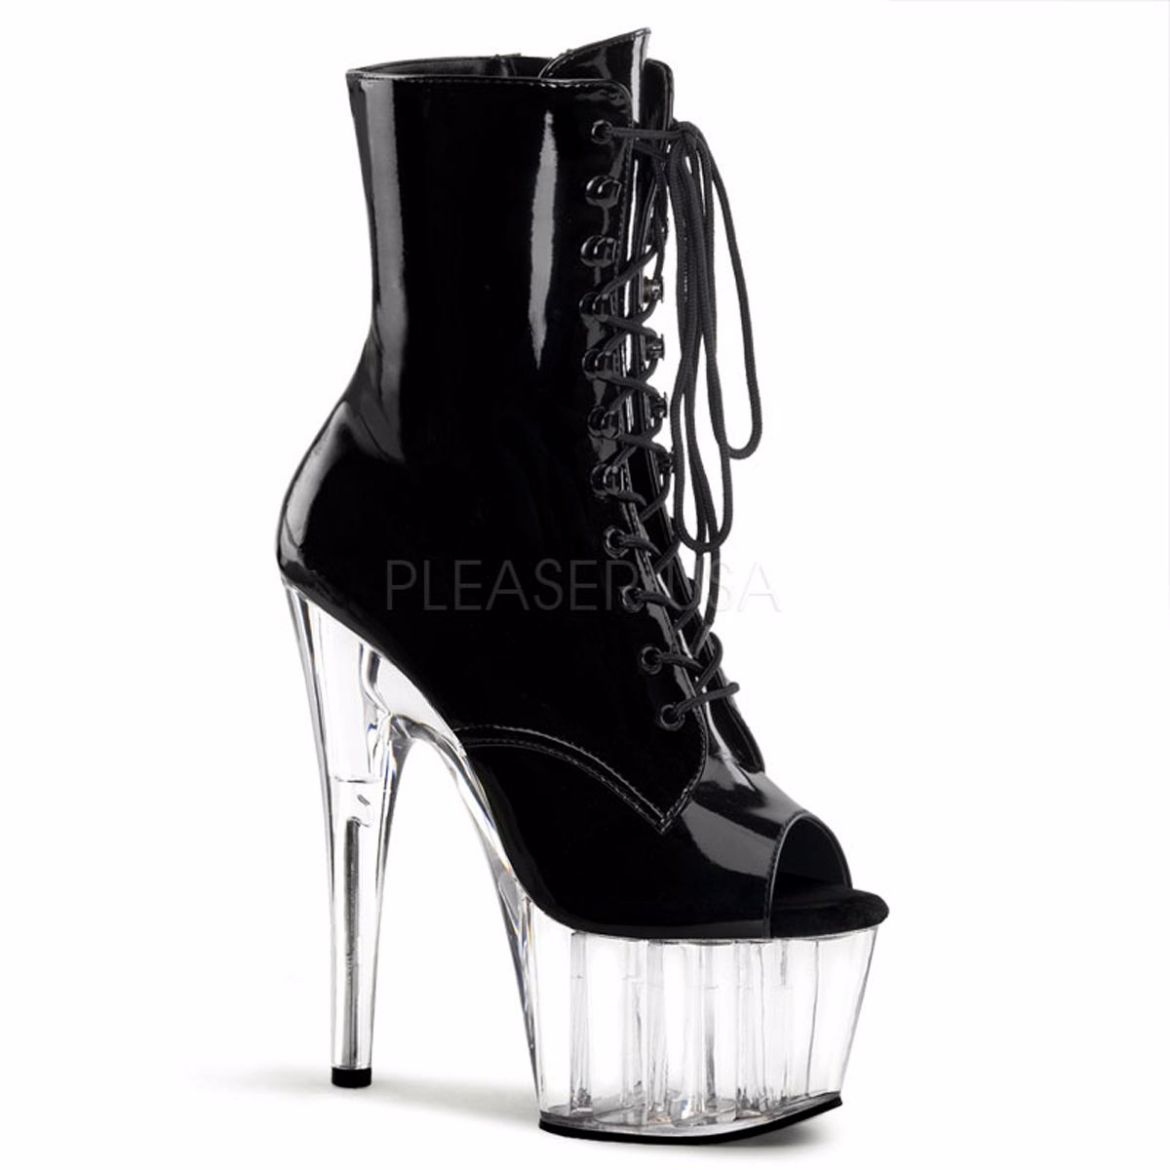 Product image of Pleaser Adore-1021 Black Patent/Clear, 7 inch (17.8 cm) Heel, 2 3/4 inch (7 cm) Platform Ankle Boot